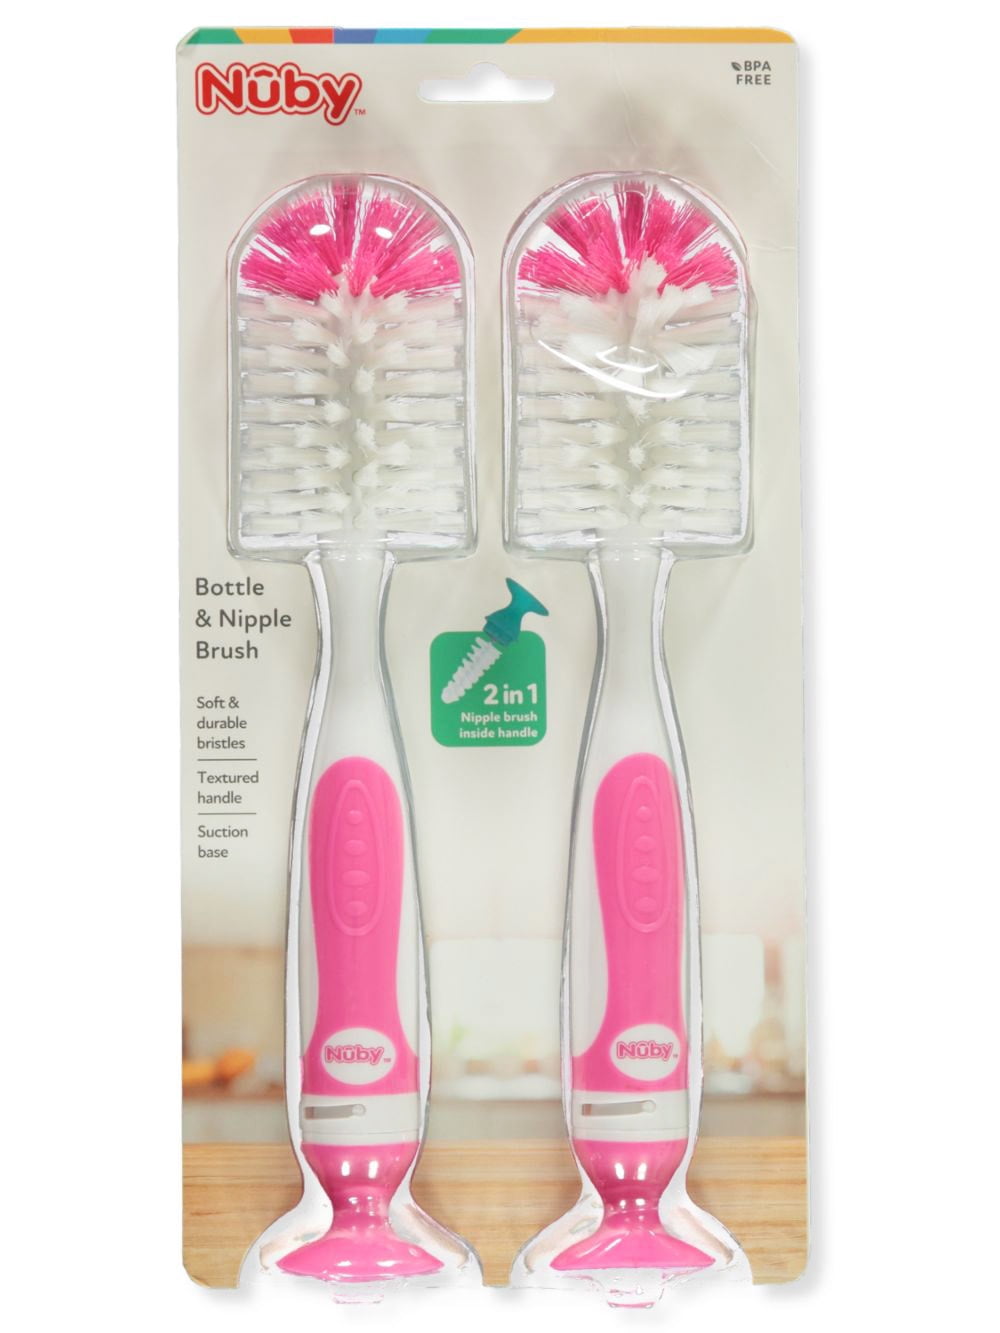 Nuby 2 in 1 Bottle Brush with Stand Review 